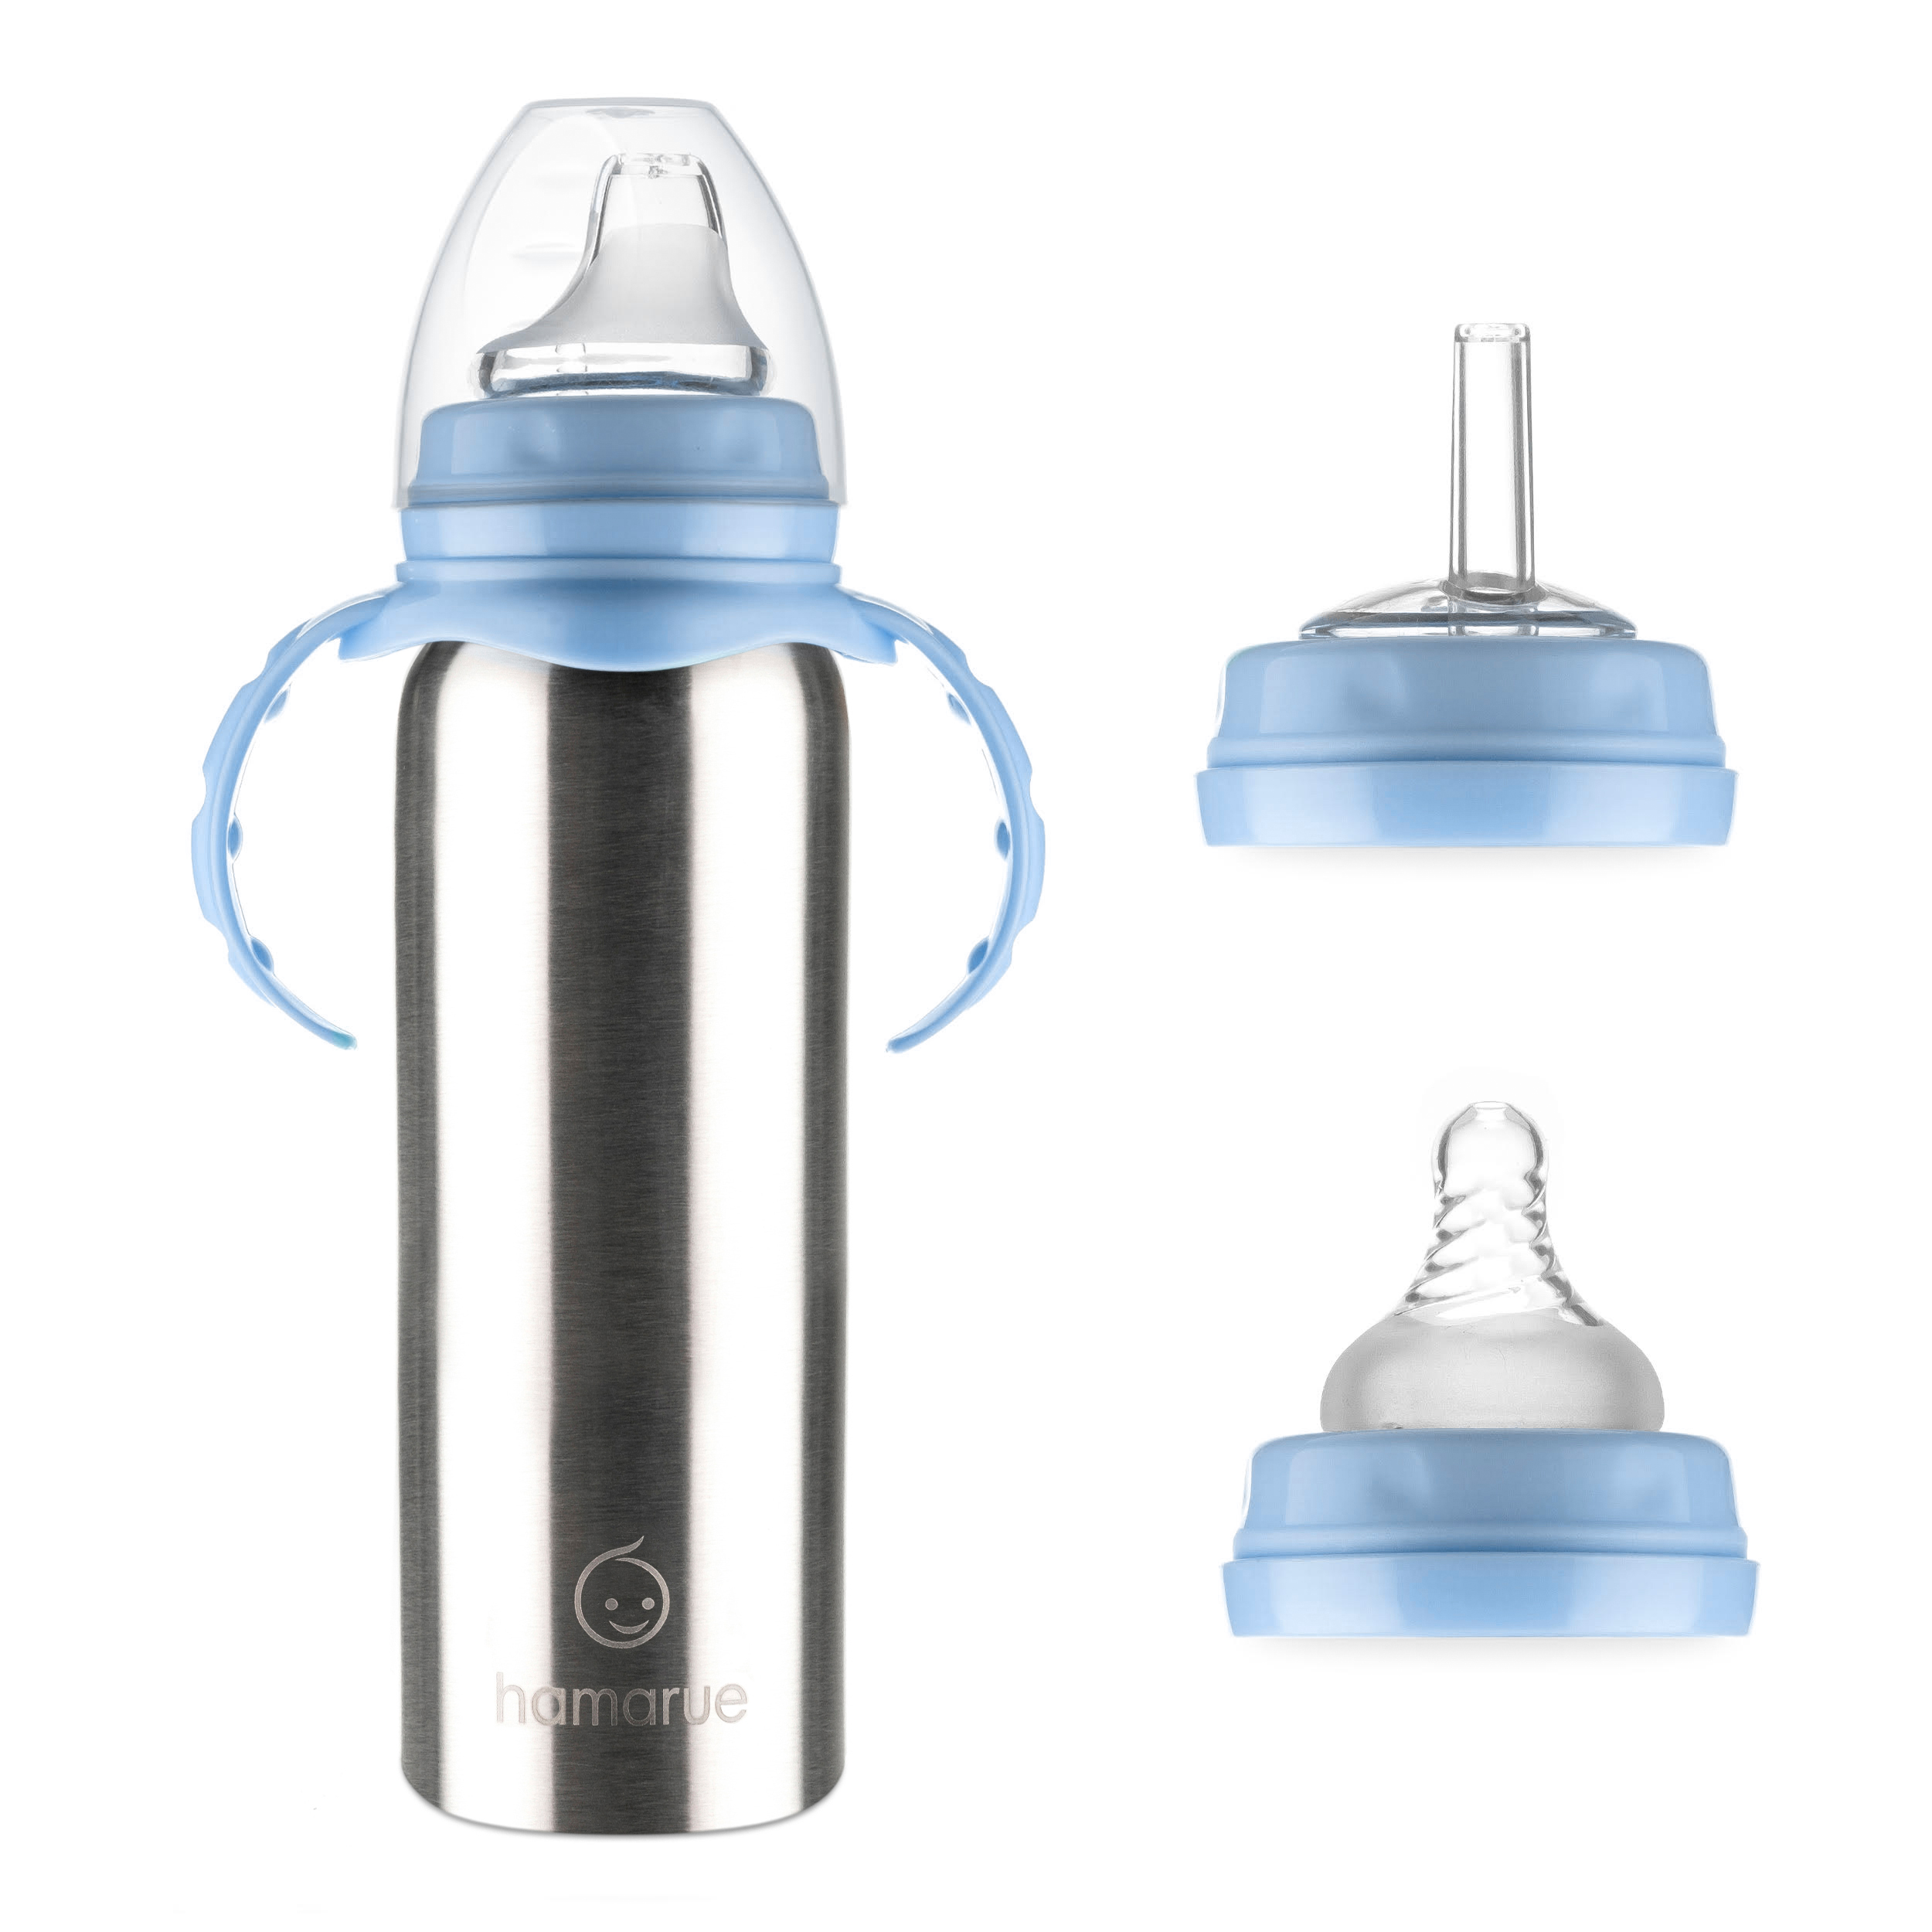 https://www.hamarue.com/wp-content/uploads/2019/08/Stainless-Steel-Baby-Bottle-Staw-Sippy-Cup.jpg